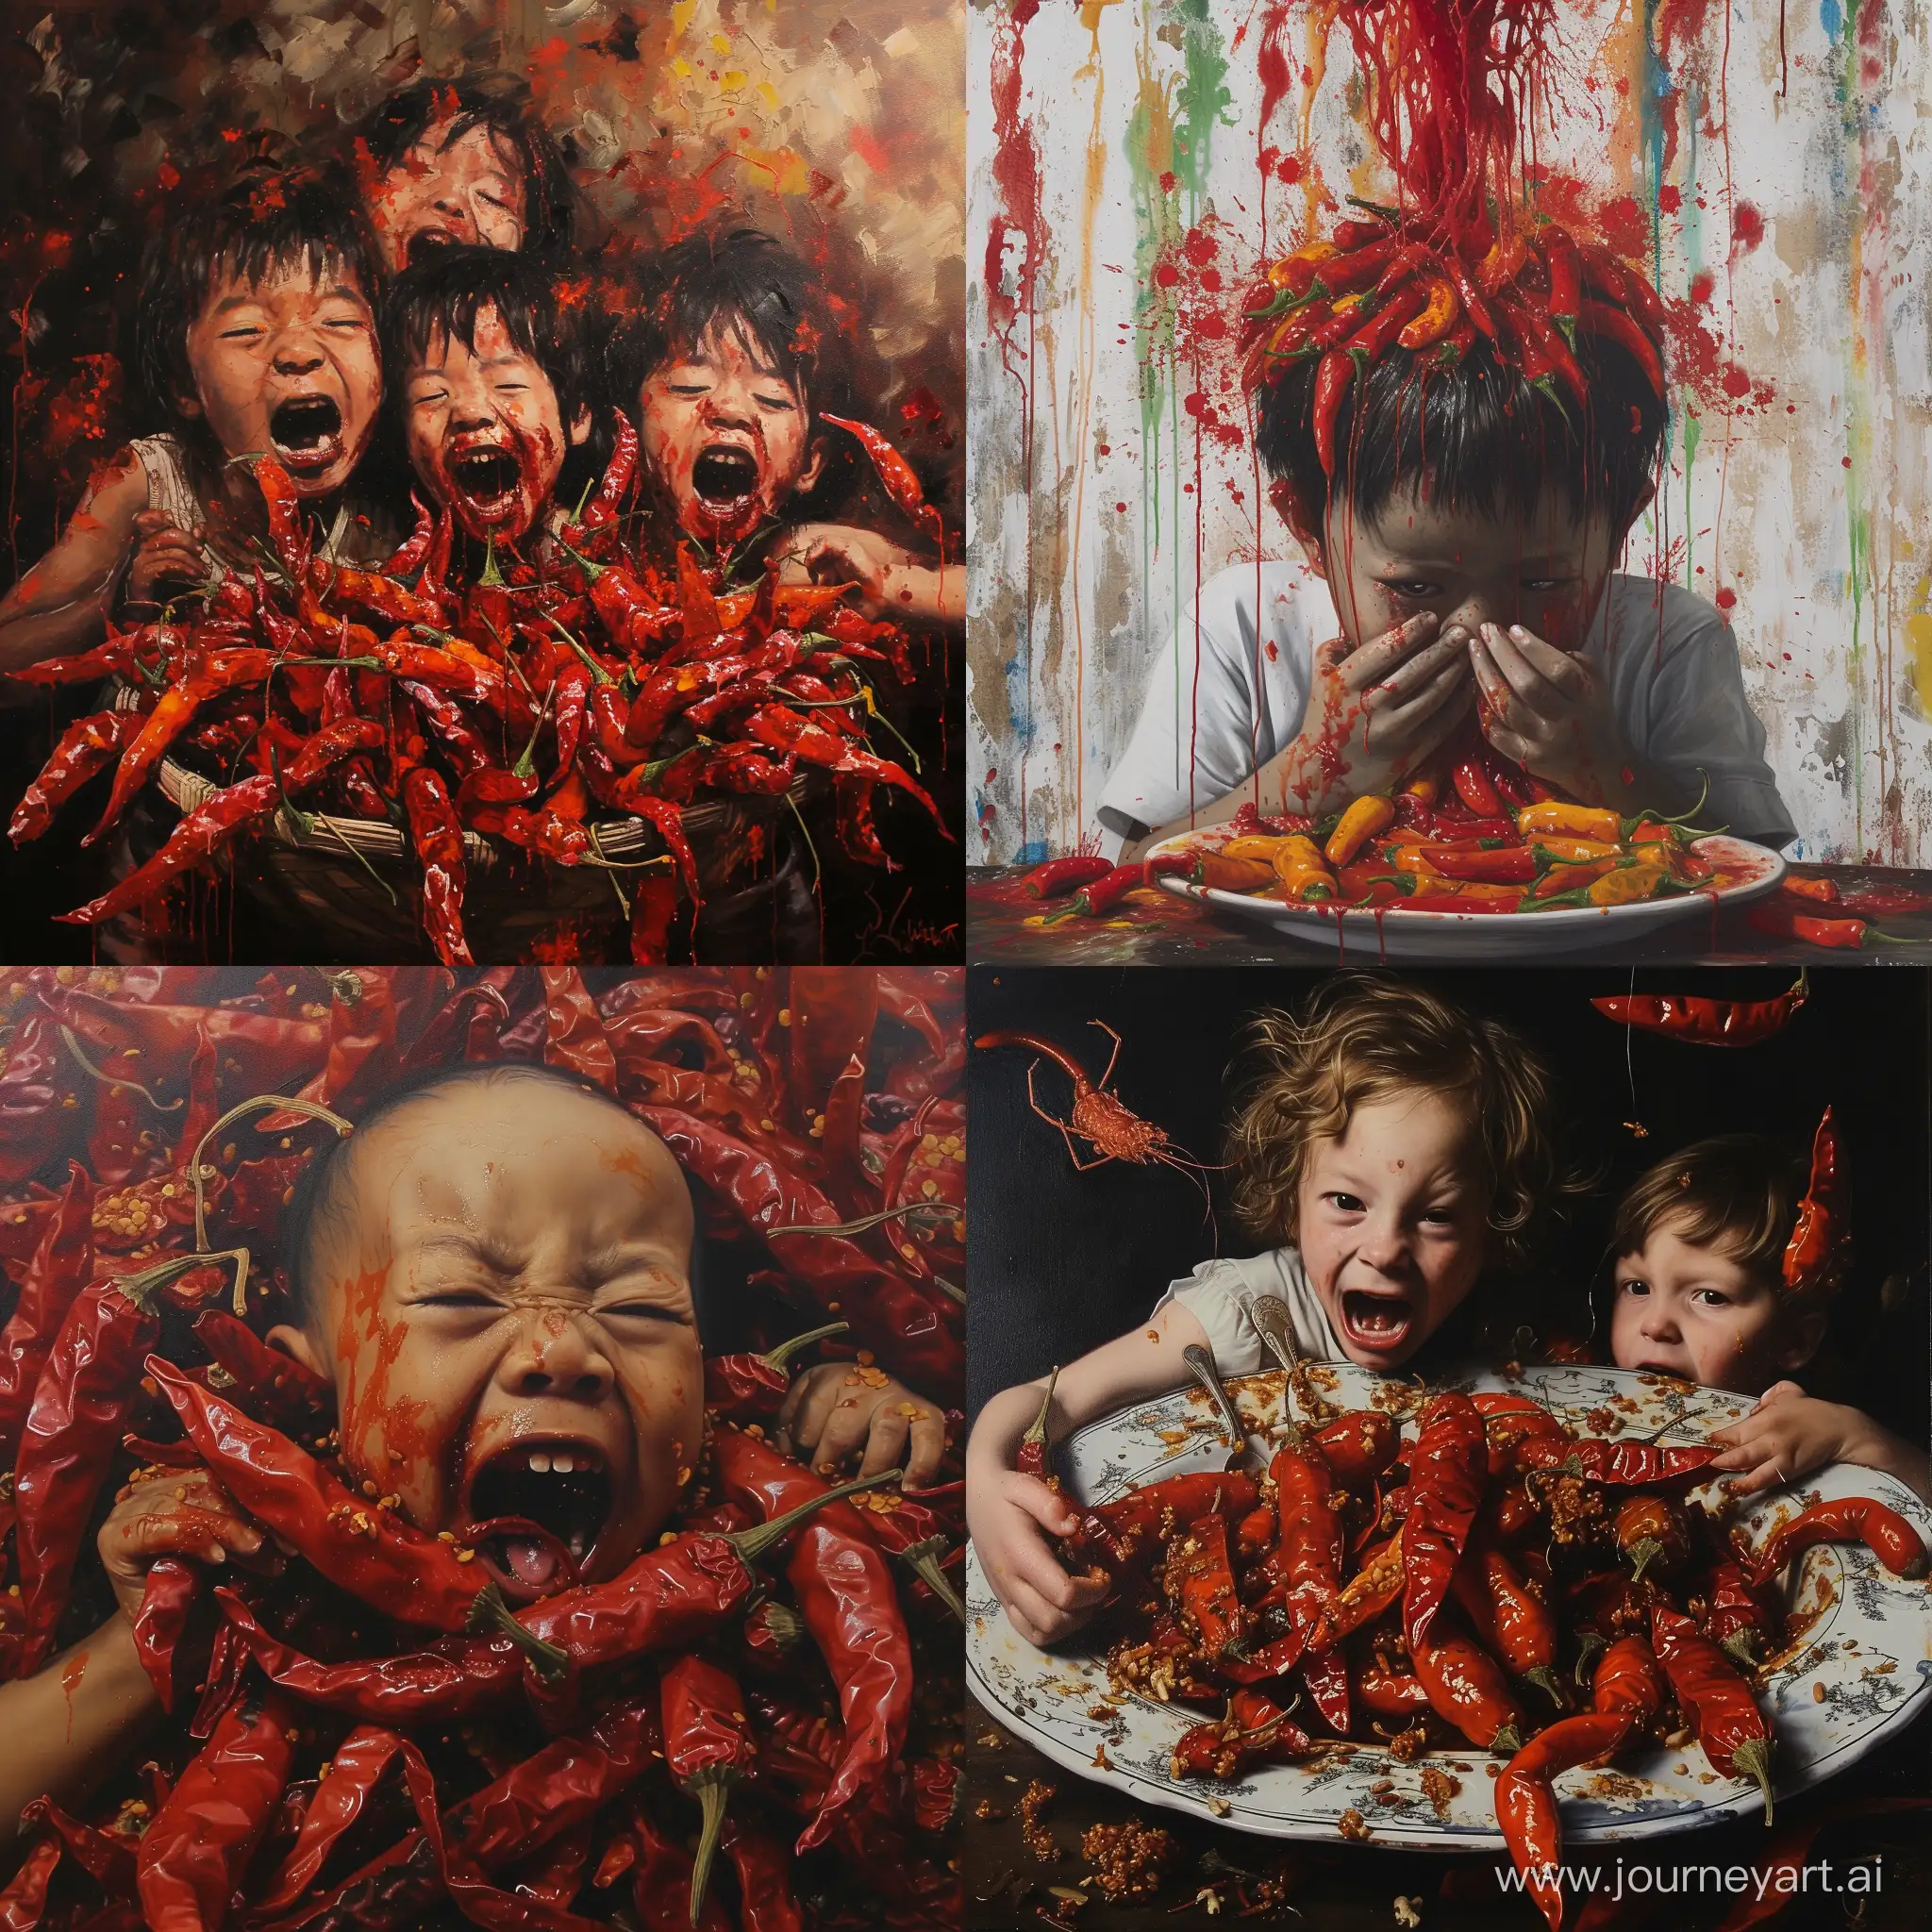 Vibrant-Spicy-Delight-Exquisite-Painting-of-Culinary-Heat-and-Playful-Innocence